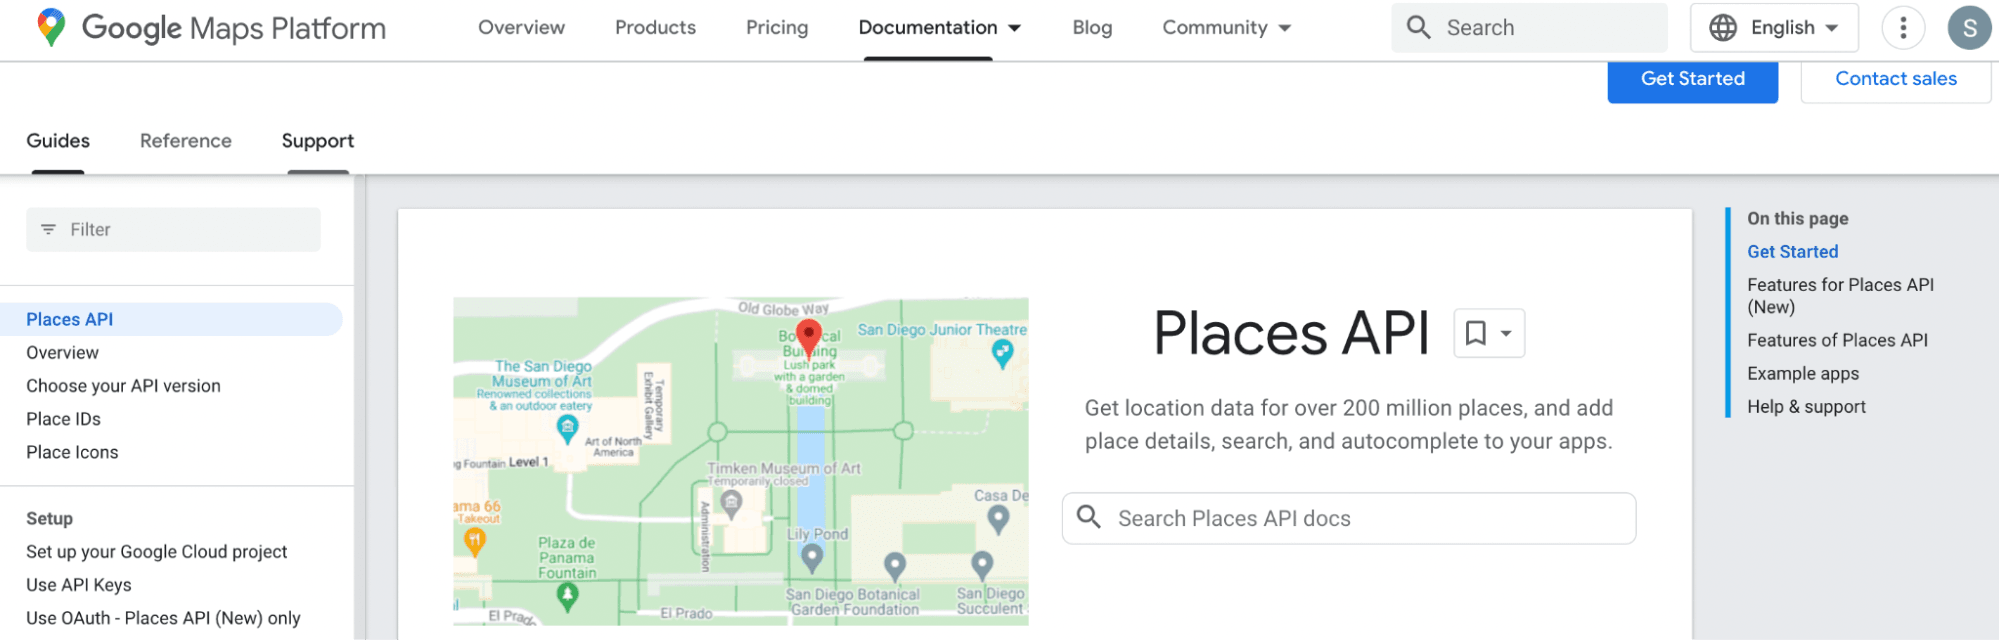 google places api product page - image12.png